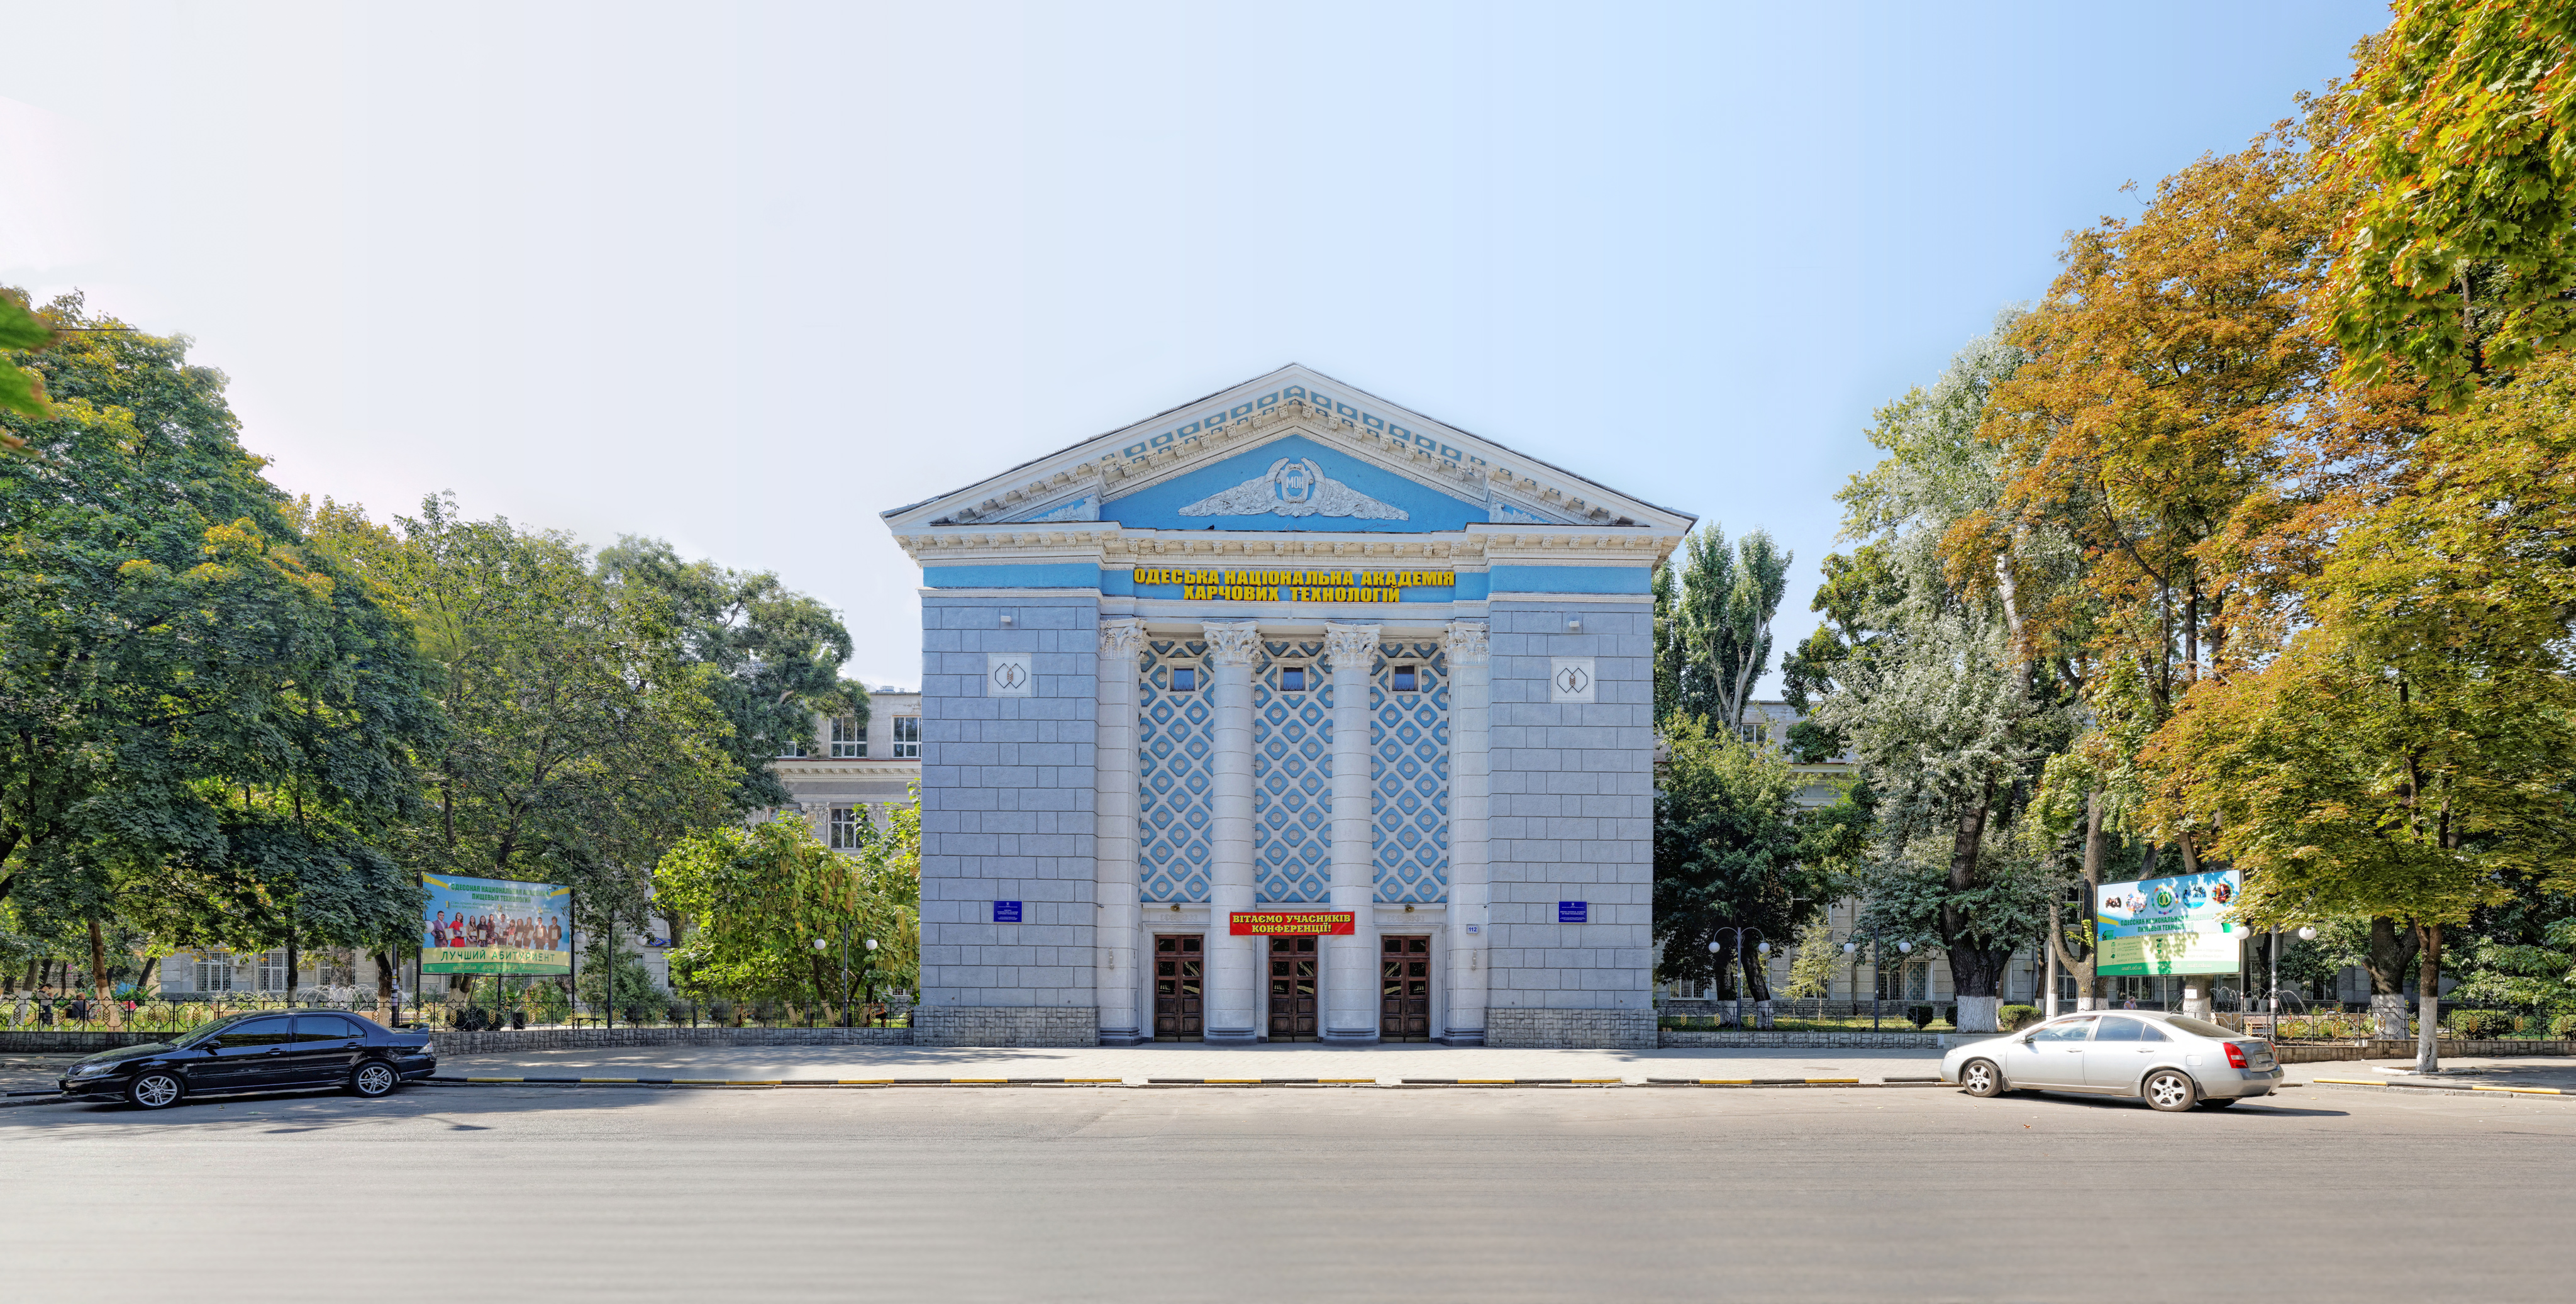 The facade of the Odessa National Academy of Food Technologies